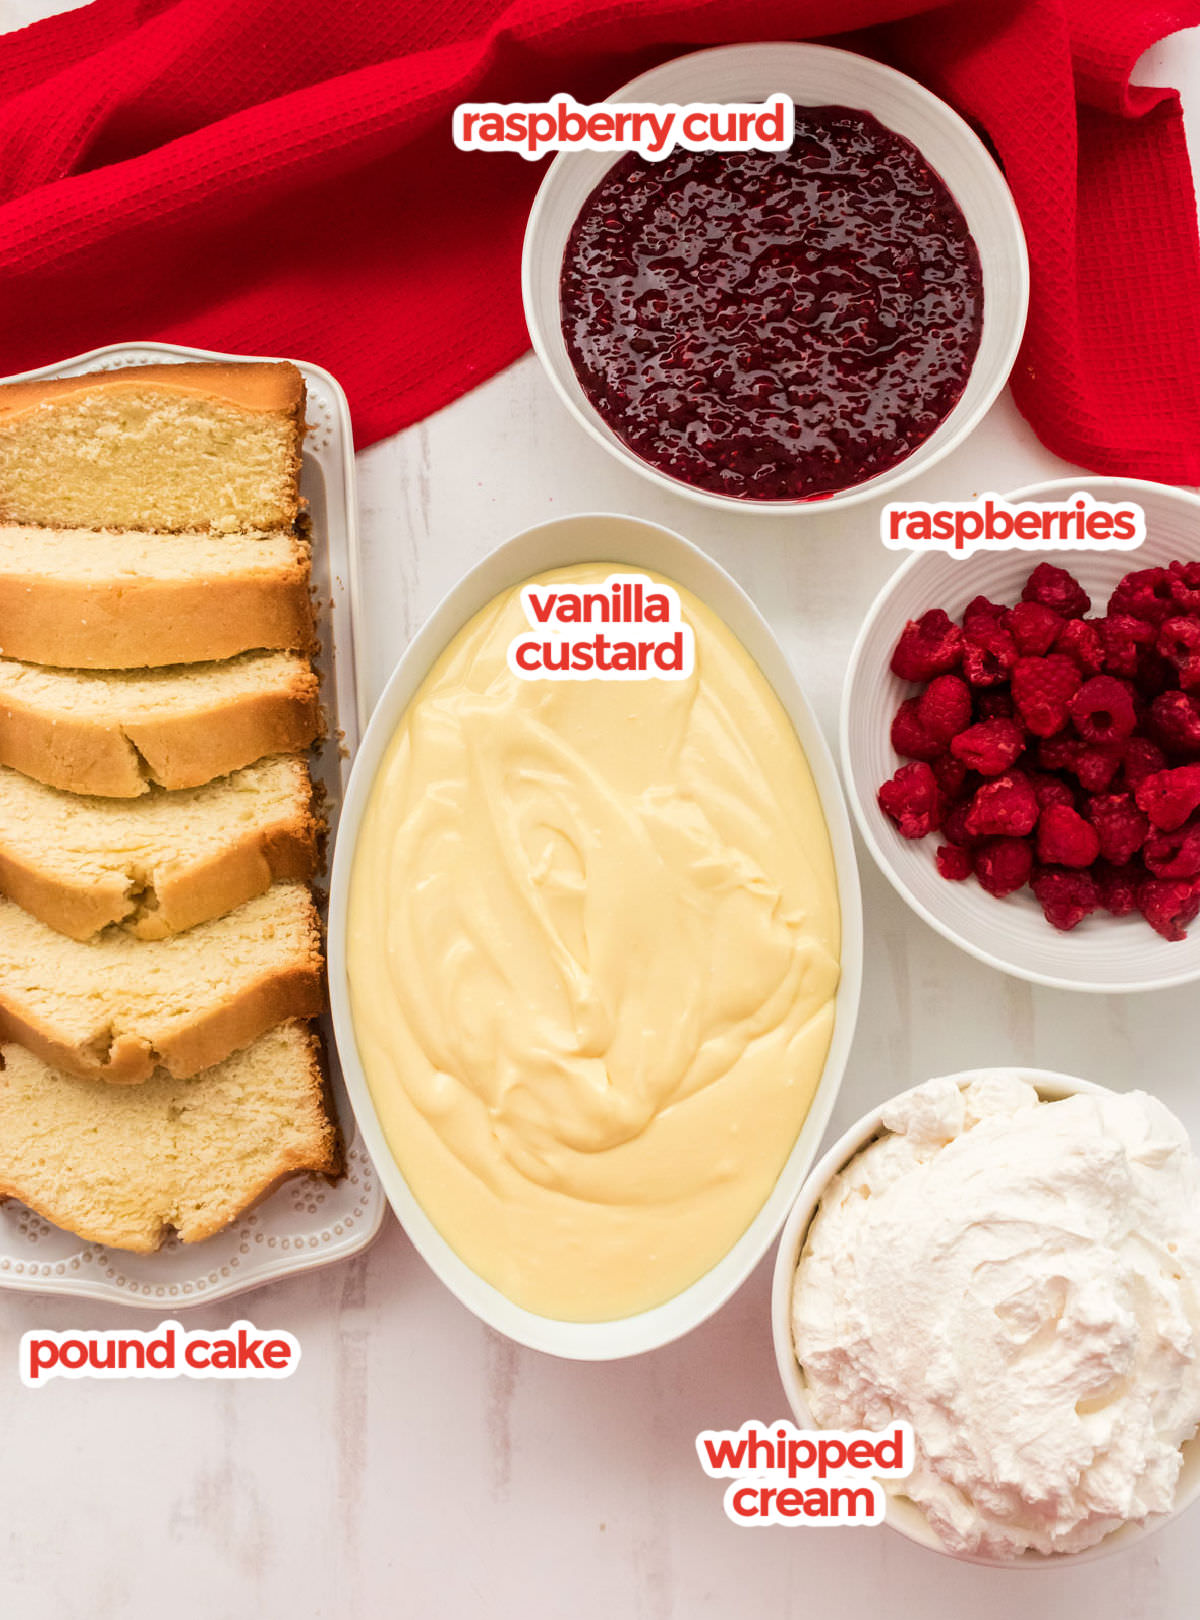 All the ingredients needed to make English Trifle including Pound Cake, Vanilla Custard, Raspberry Curd, Fresh Raspberries, and Whipped Cream.